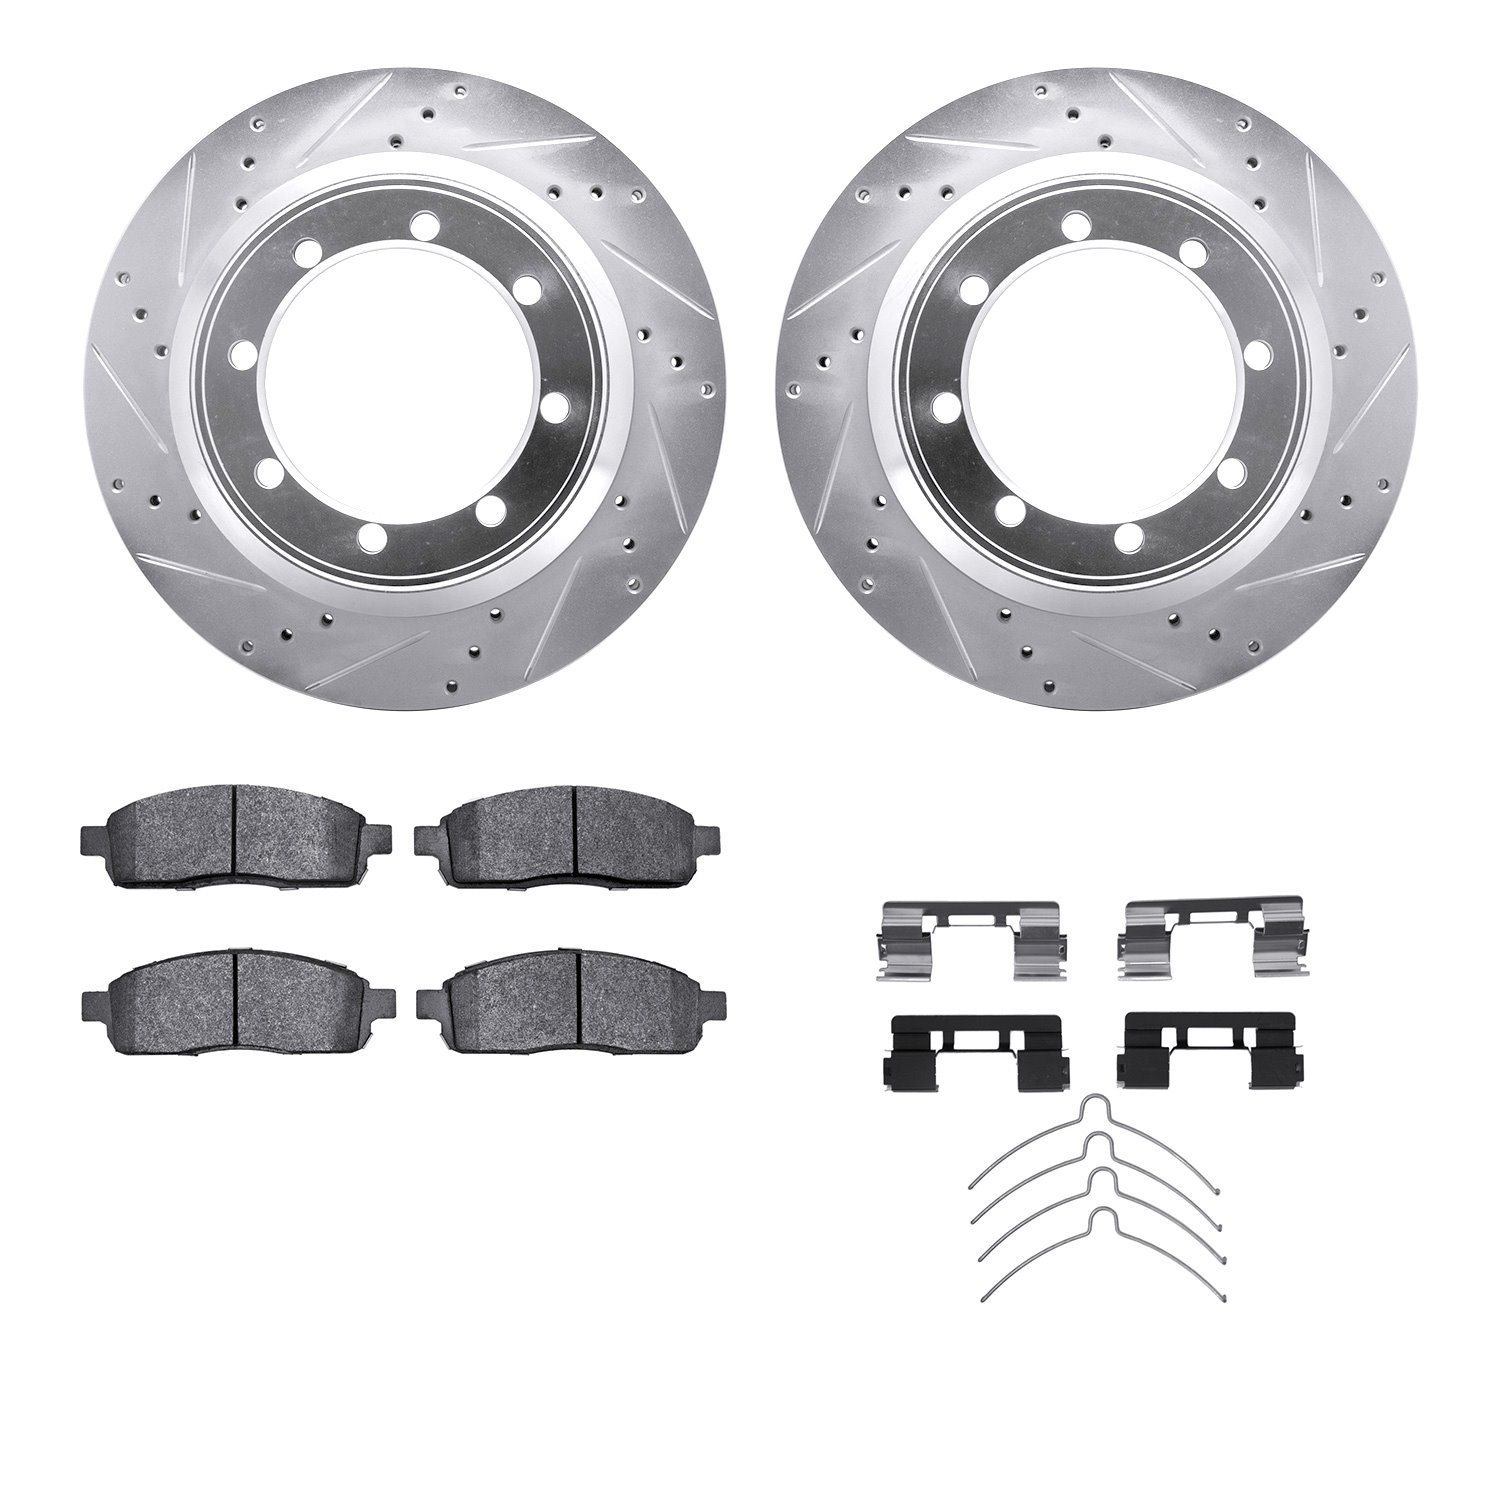 7212-99184 Drilled/Slotted Rotors w/Heavy-Duty Brake Pads Kit & Hardware [Silver], 2004-2008 Ford/Lincoln/Mercury/Mazda, Positio